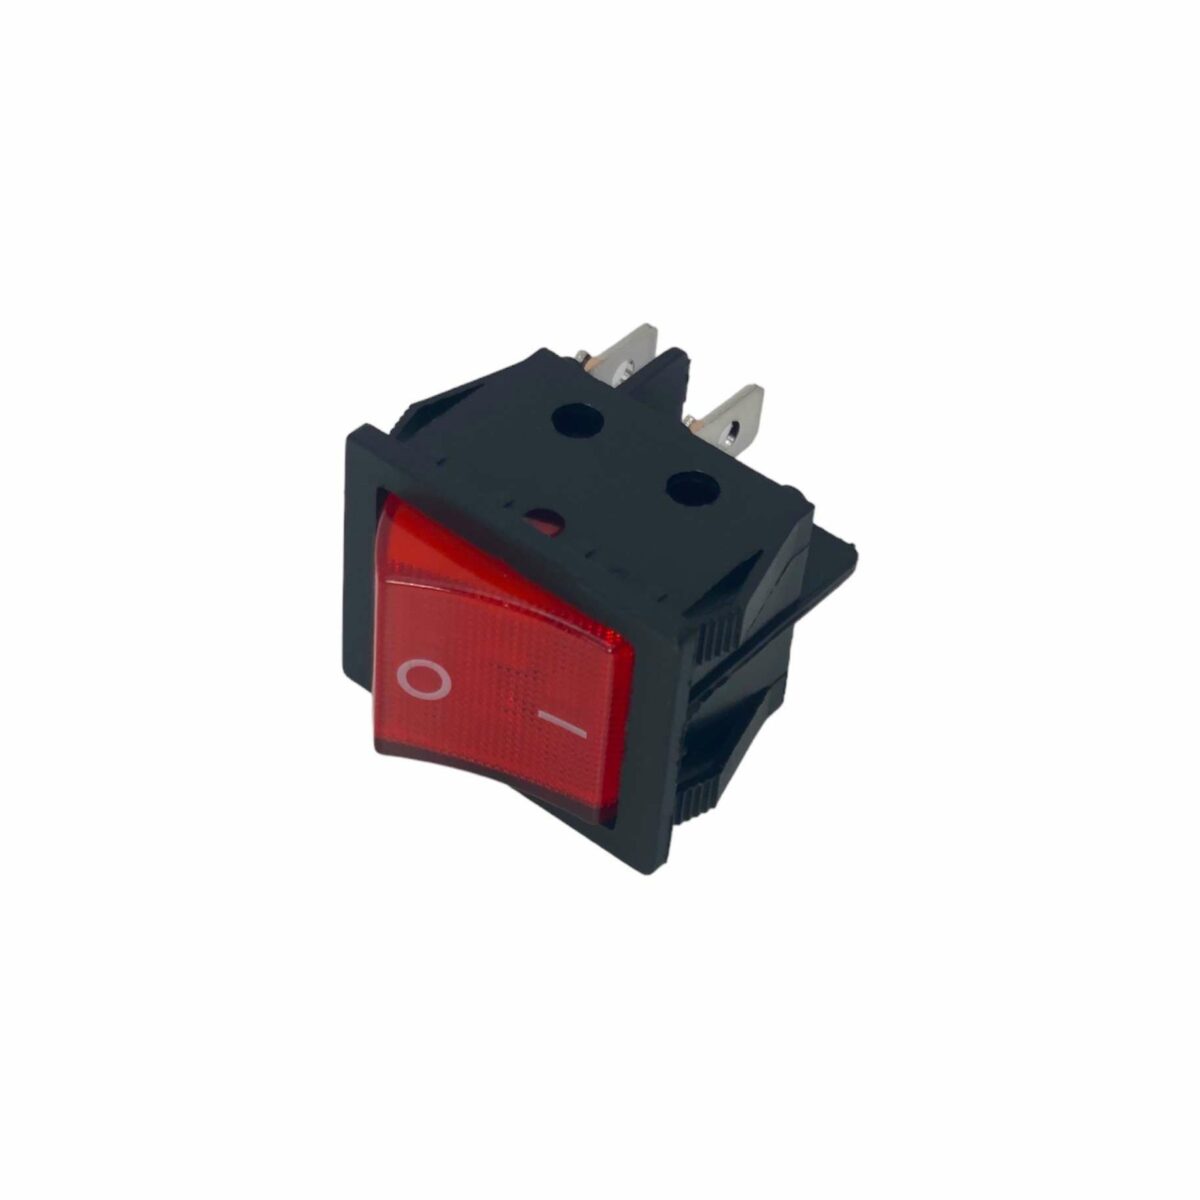 ENGL Red Replacement Power Switch